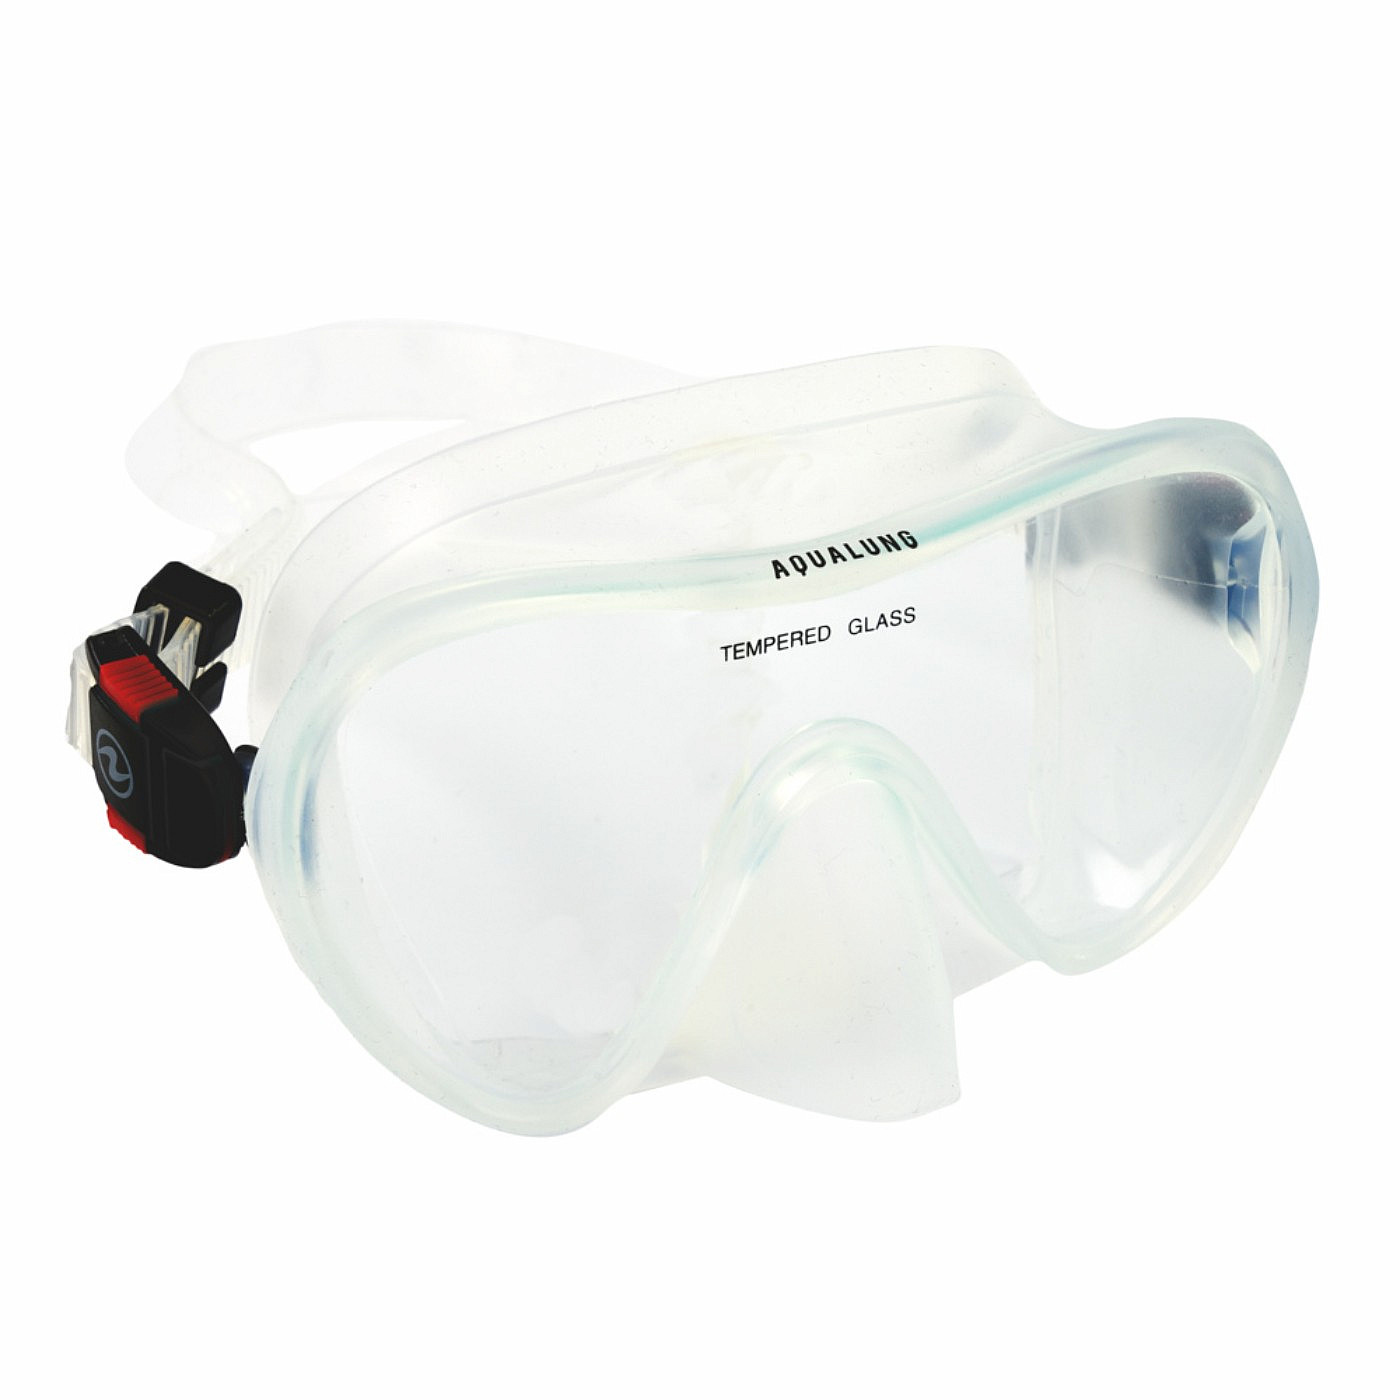 Aqualung Nabul Pink Mask Scuba Diving Buy and Sales in Gidive Store